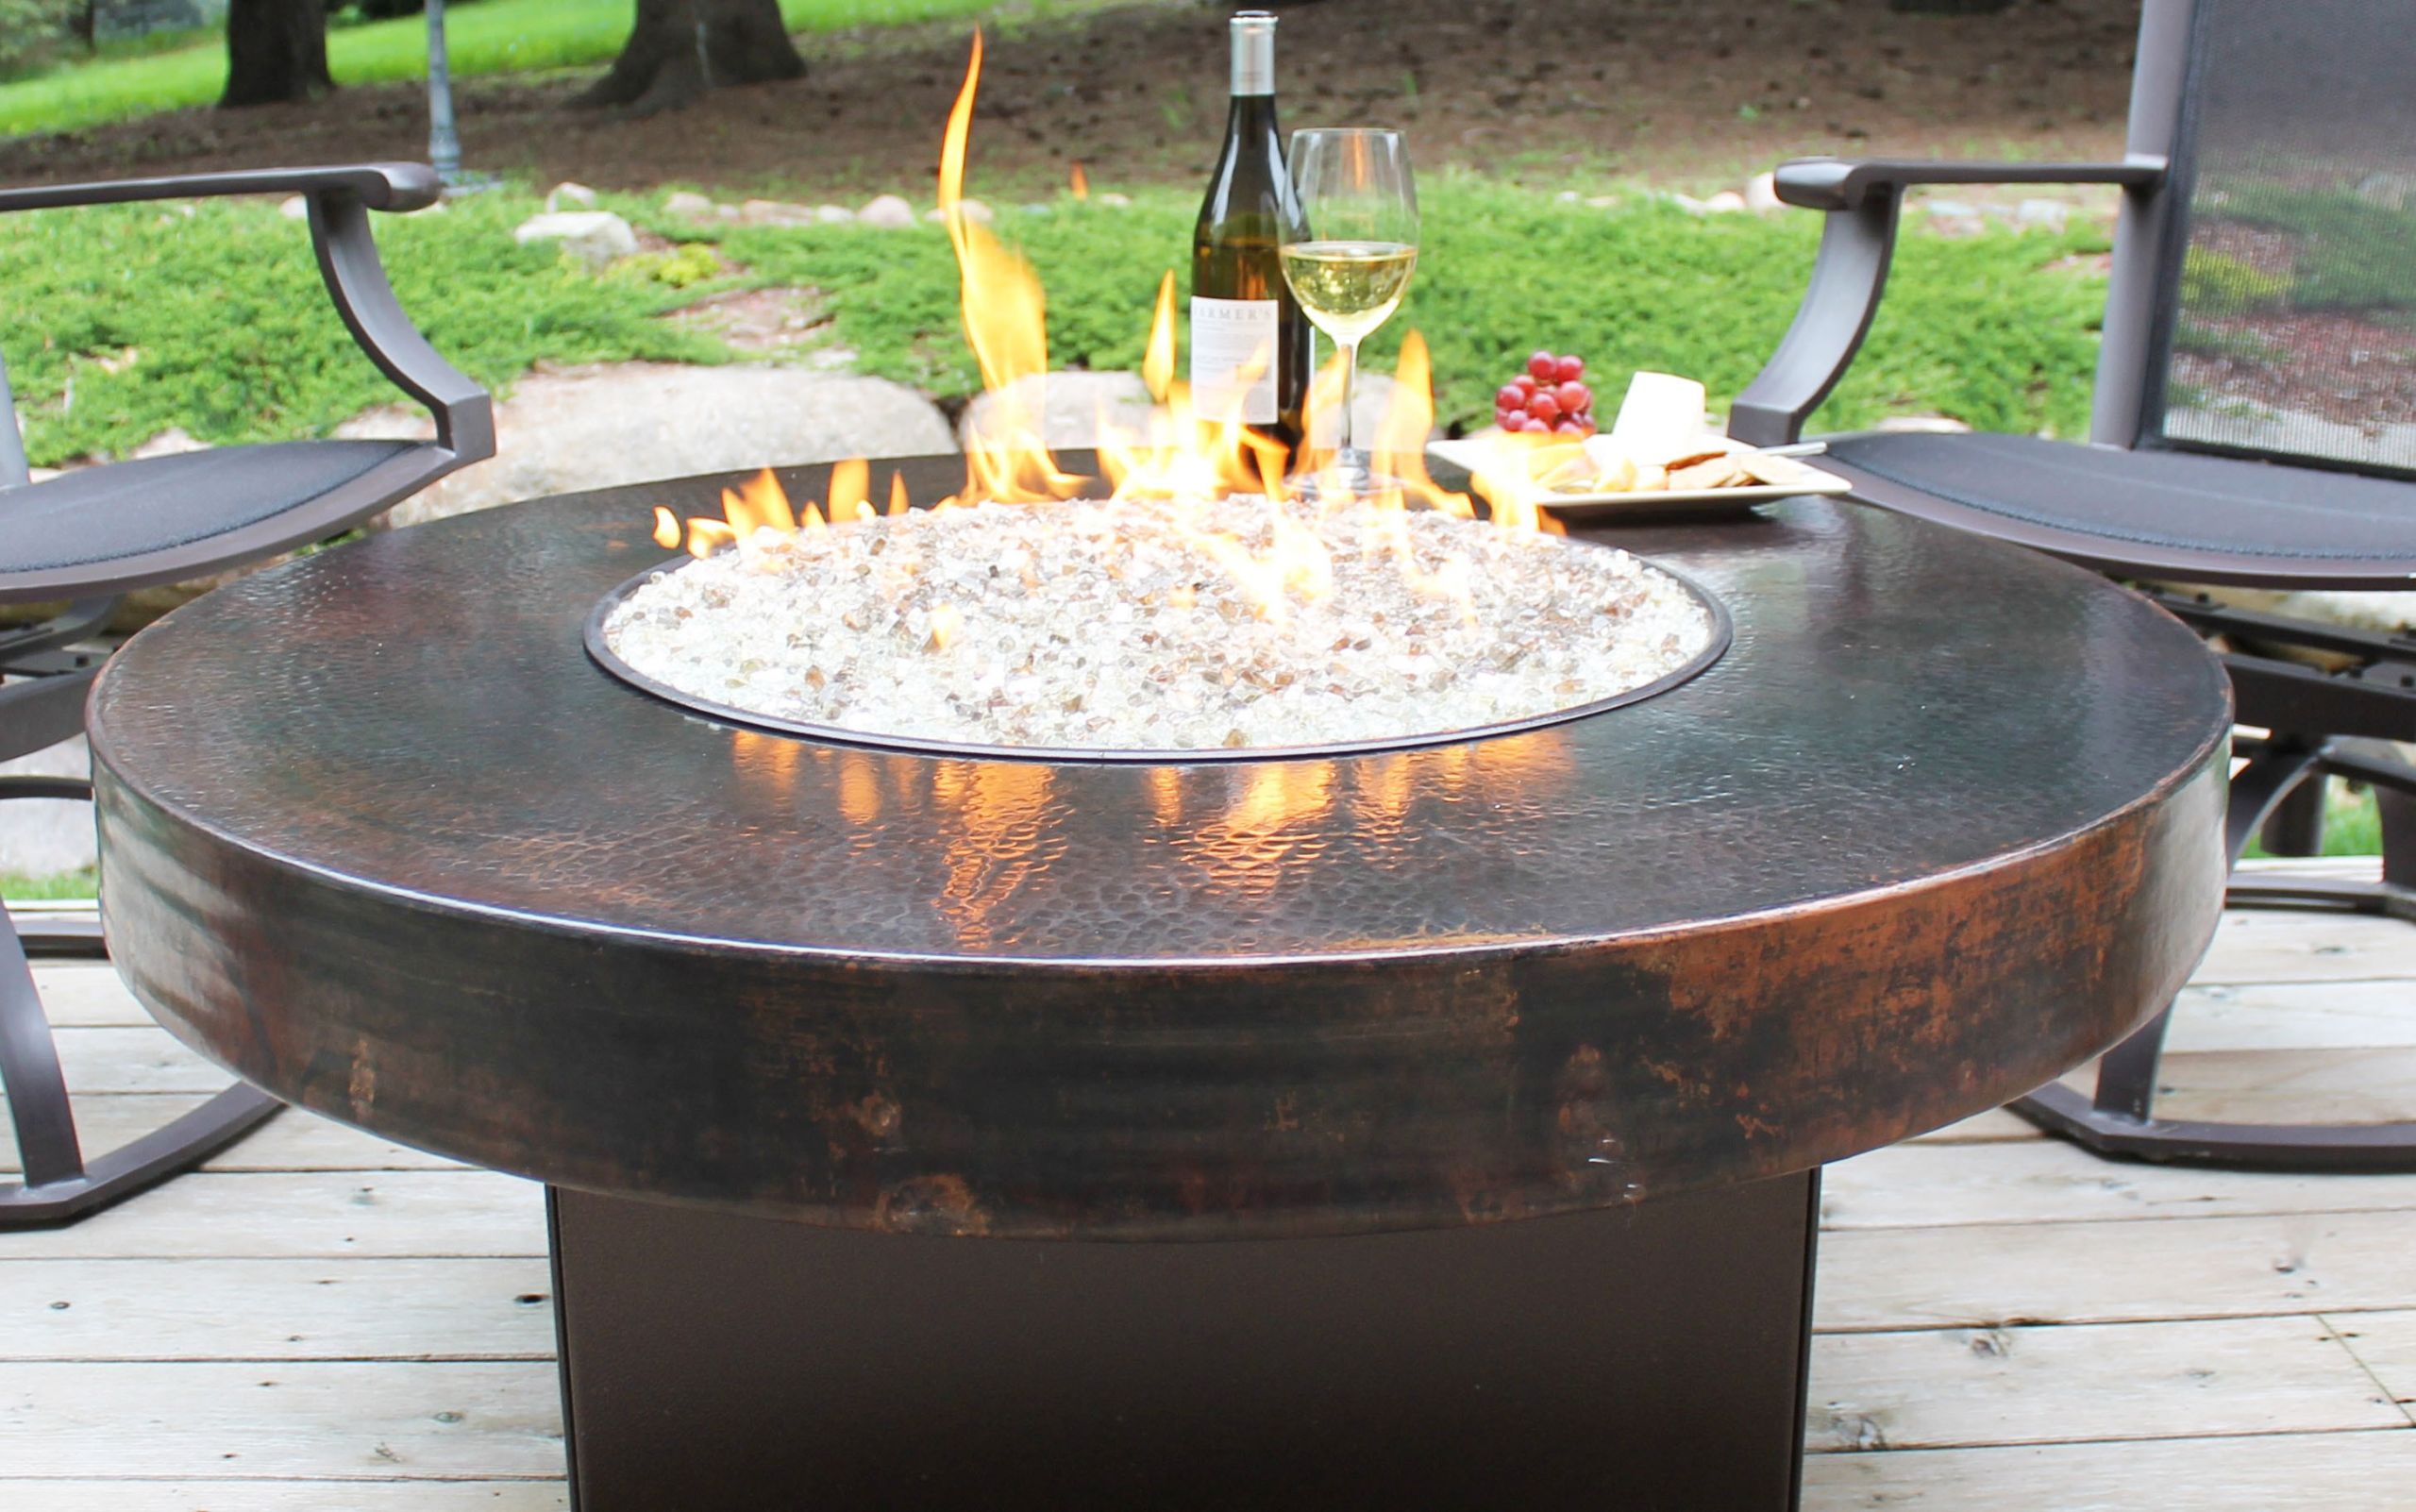 DIY Propane Fire Pit Kits
 How to Make Tabletop Fire Pit Kit DIY